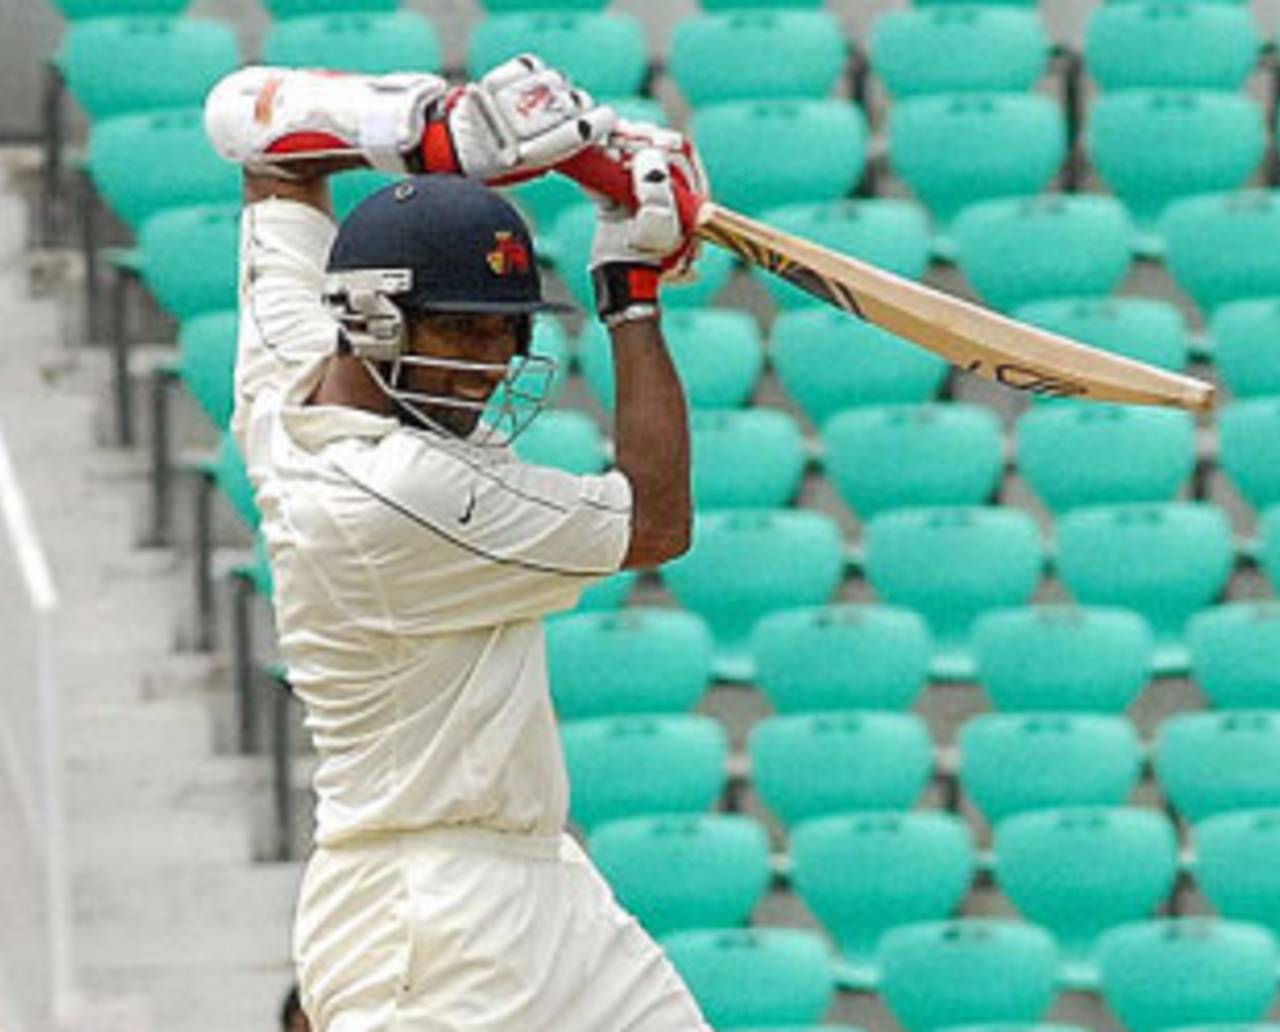 Wasim Jaffer drives straight during his 68, Mumbai v Rest of India, Irani Cup, Nagpur, 2nd day, October 2, 2009